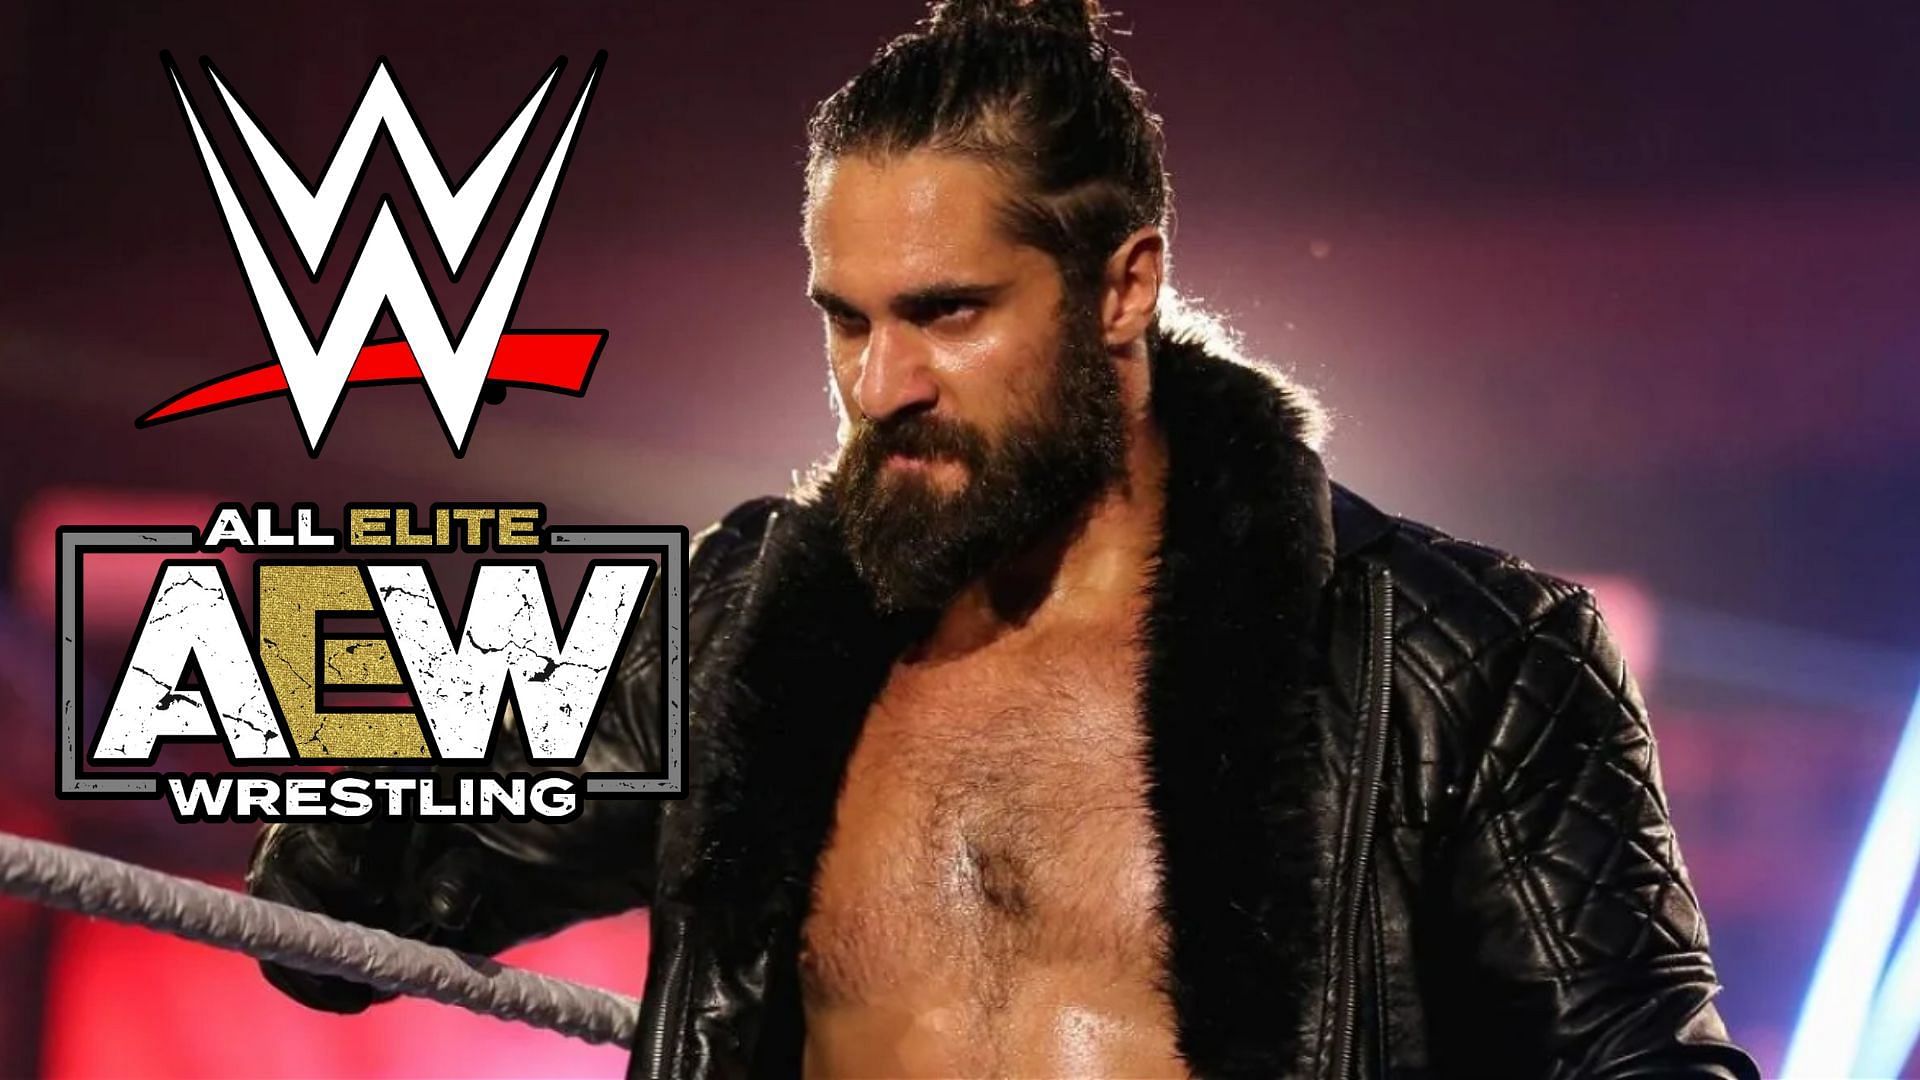 Did Seth Rollins make a mistake by teaming up with these two stars?